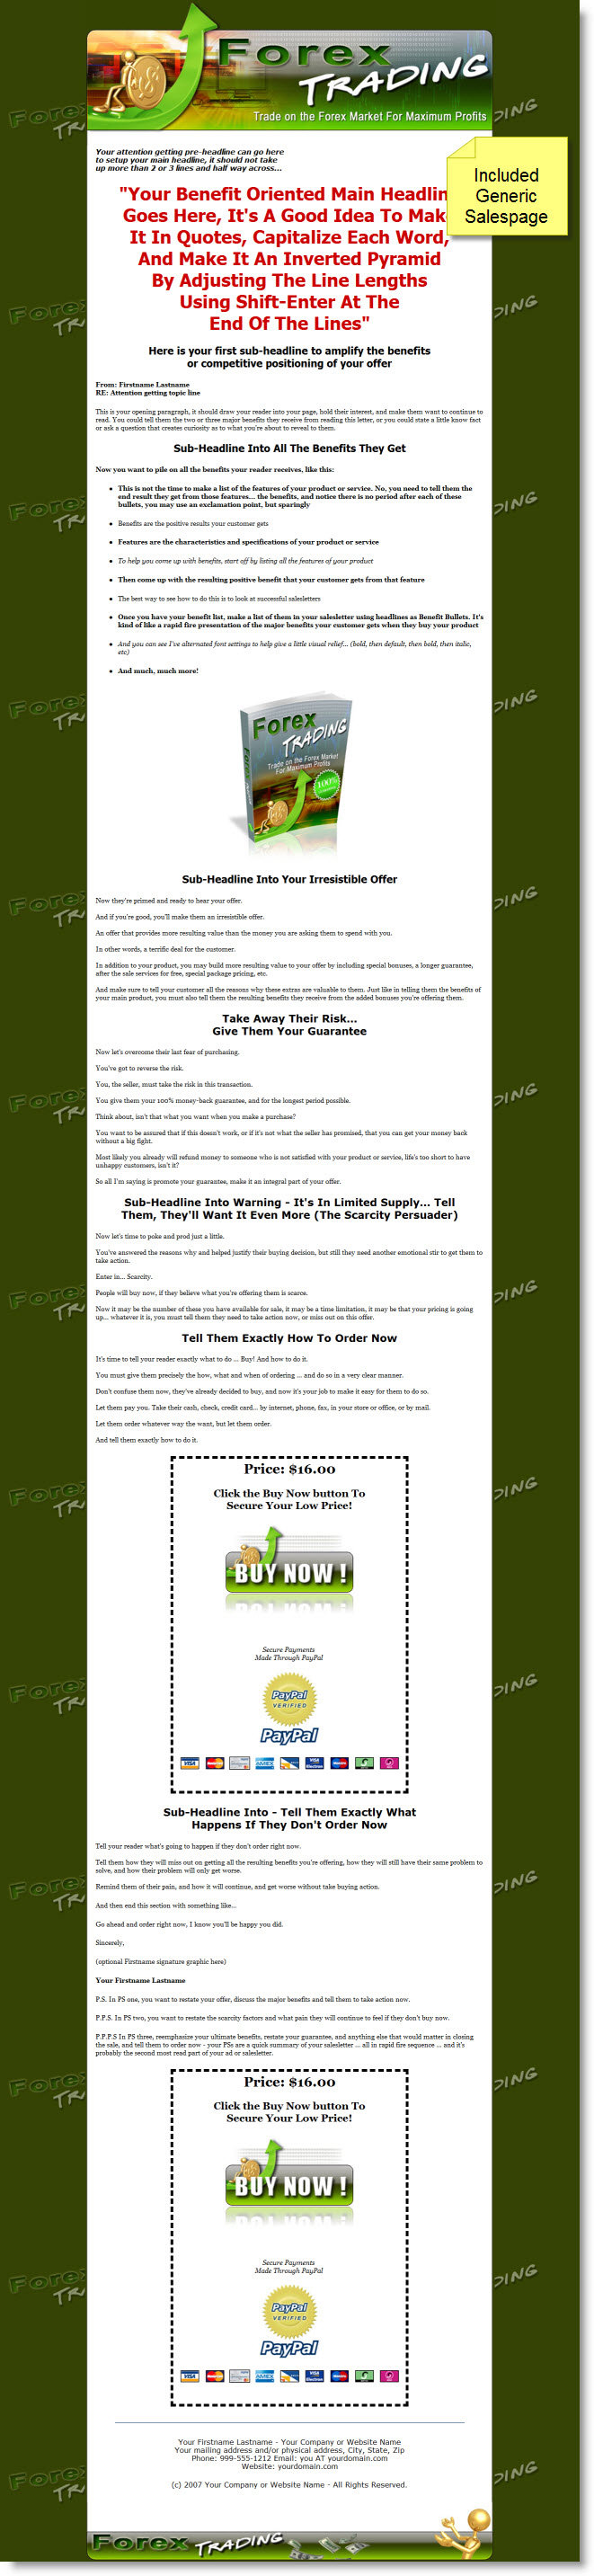 Forex Trading Viral eBook Master Resale Rights